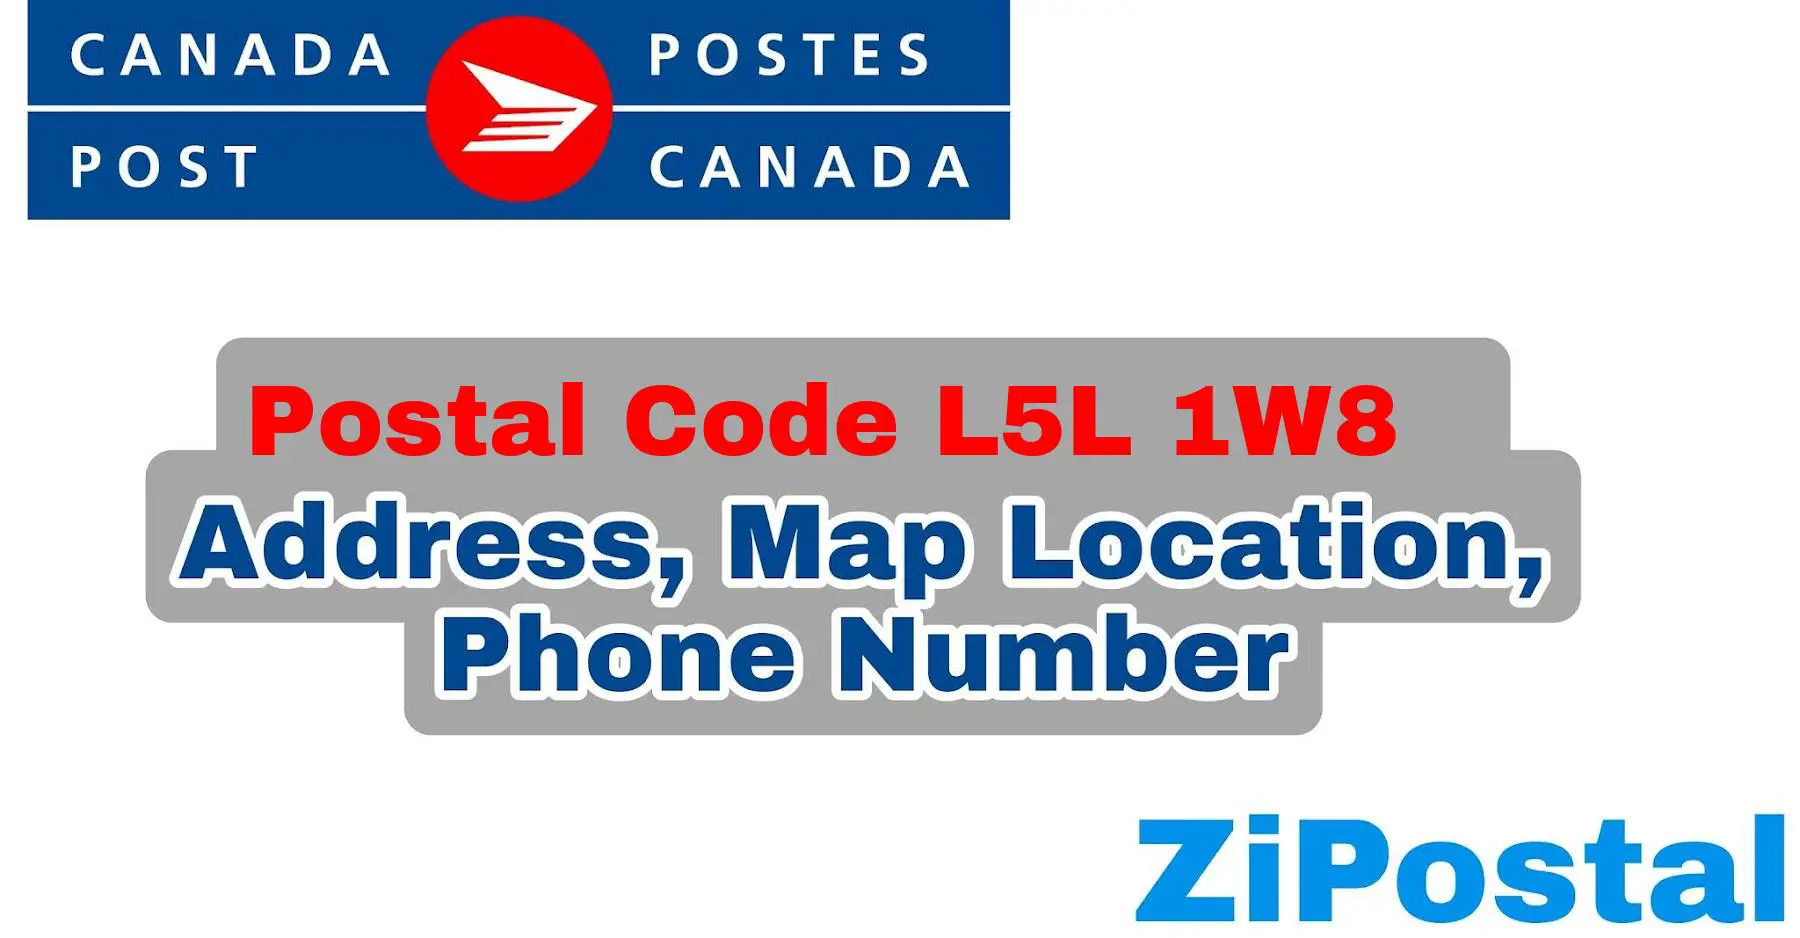 Postal Code L5L 1W8 Address Map Location and Phone Number